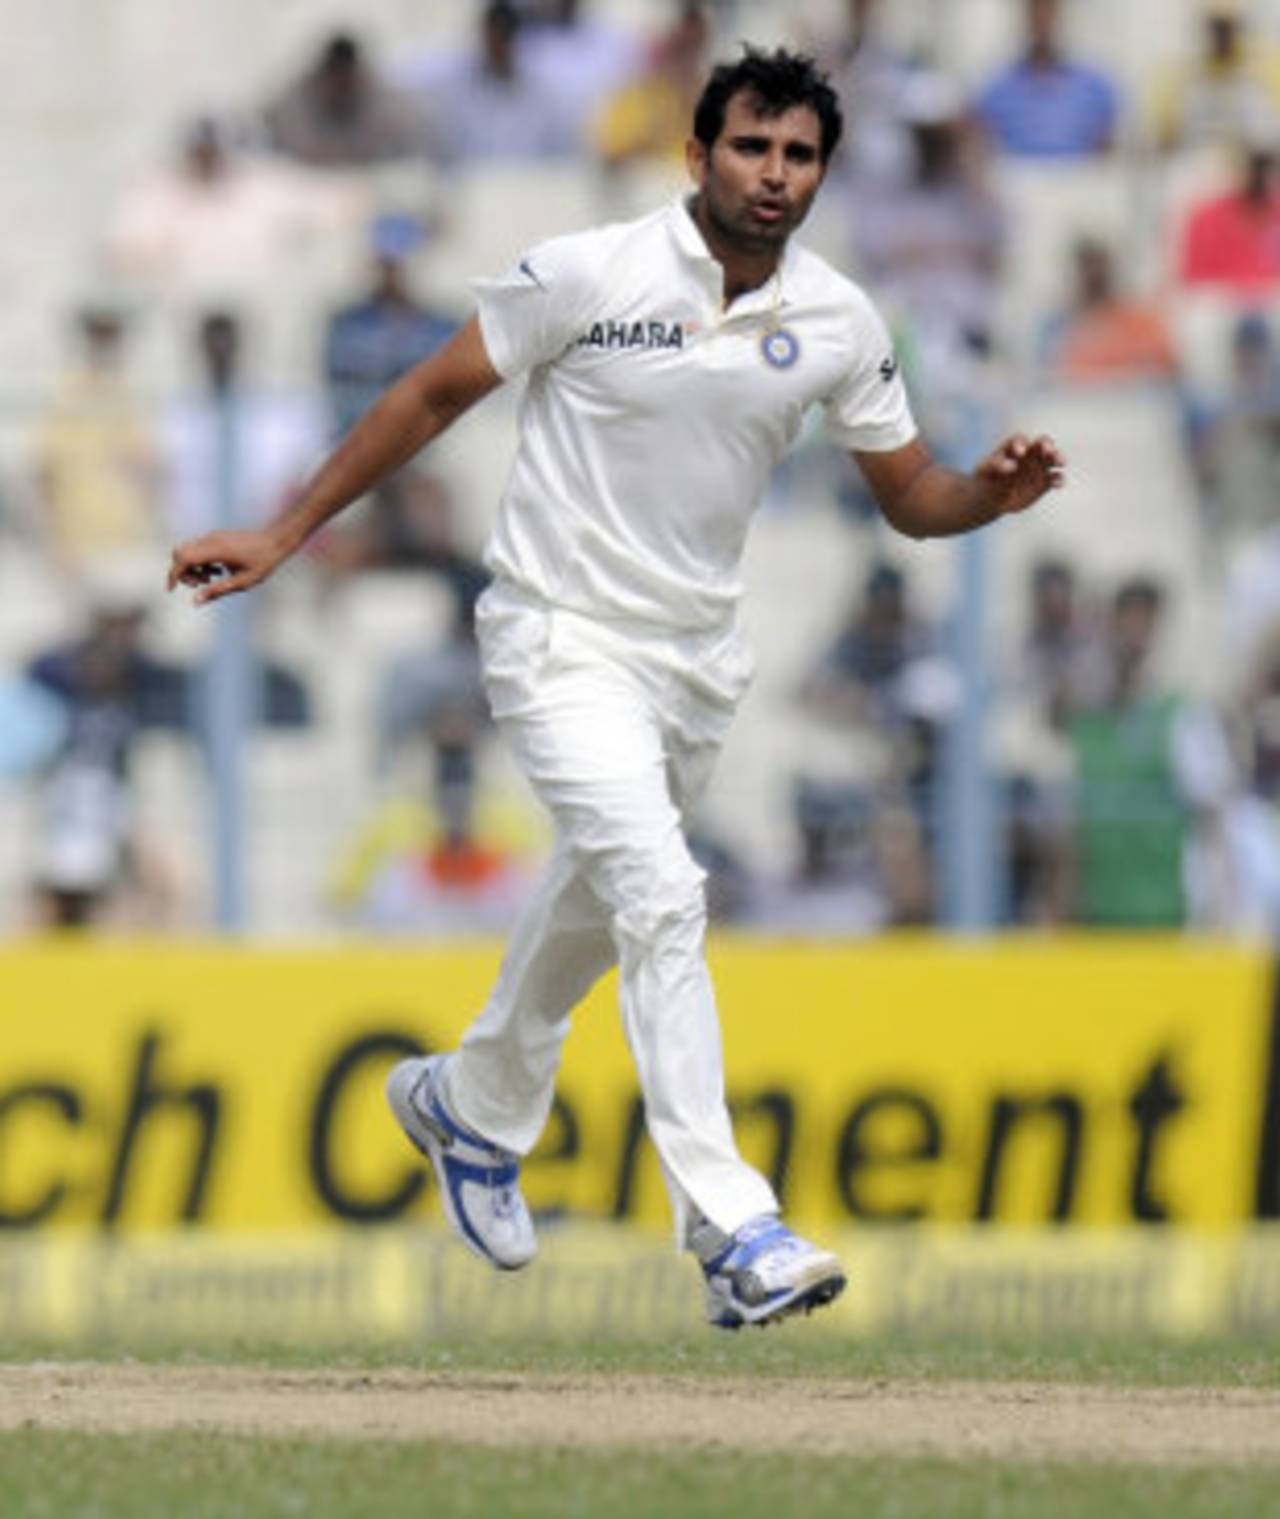 Mohammed Shami found success with the reverse swing, India v West Indies, 1st Test, Kolkata, 1st day, November 6, 2013